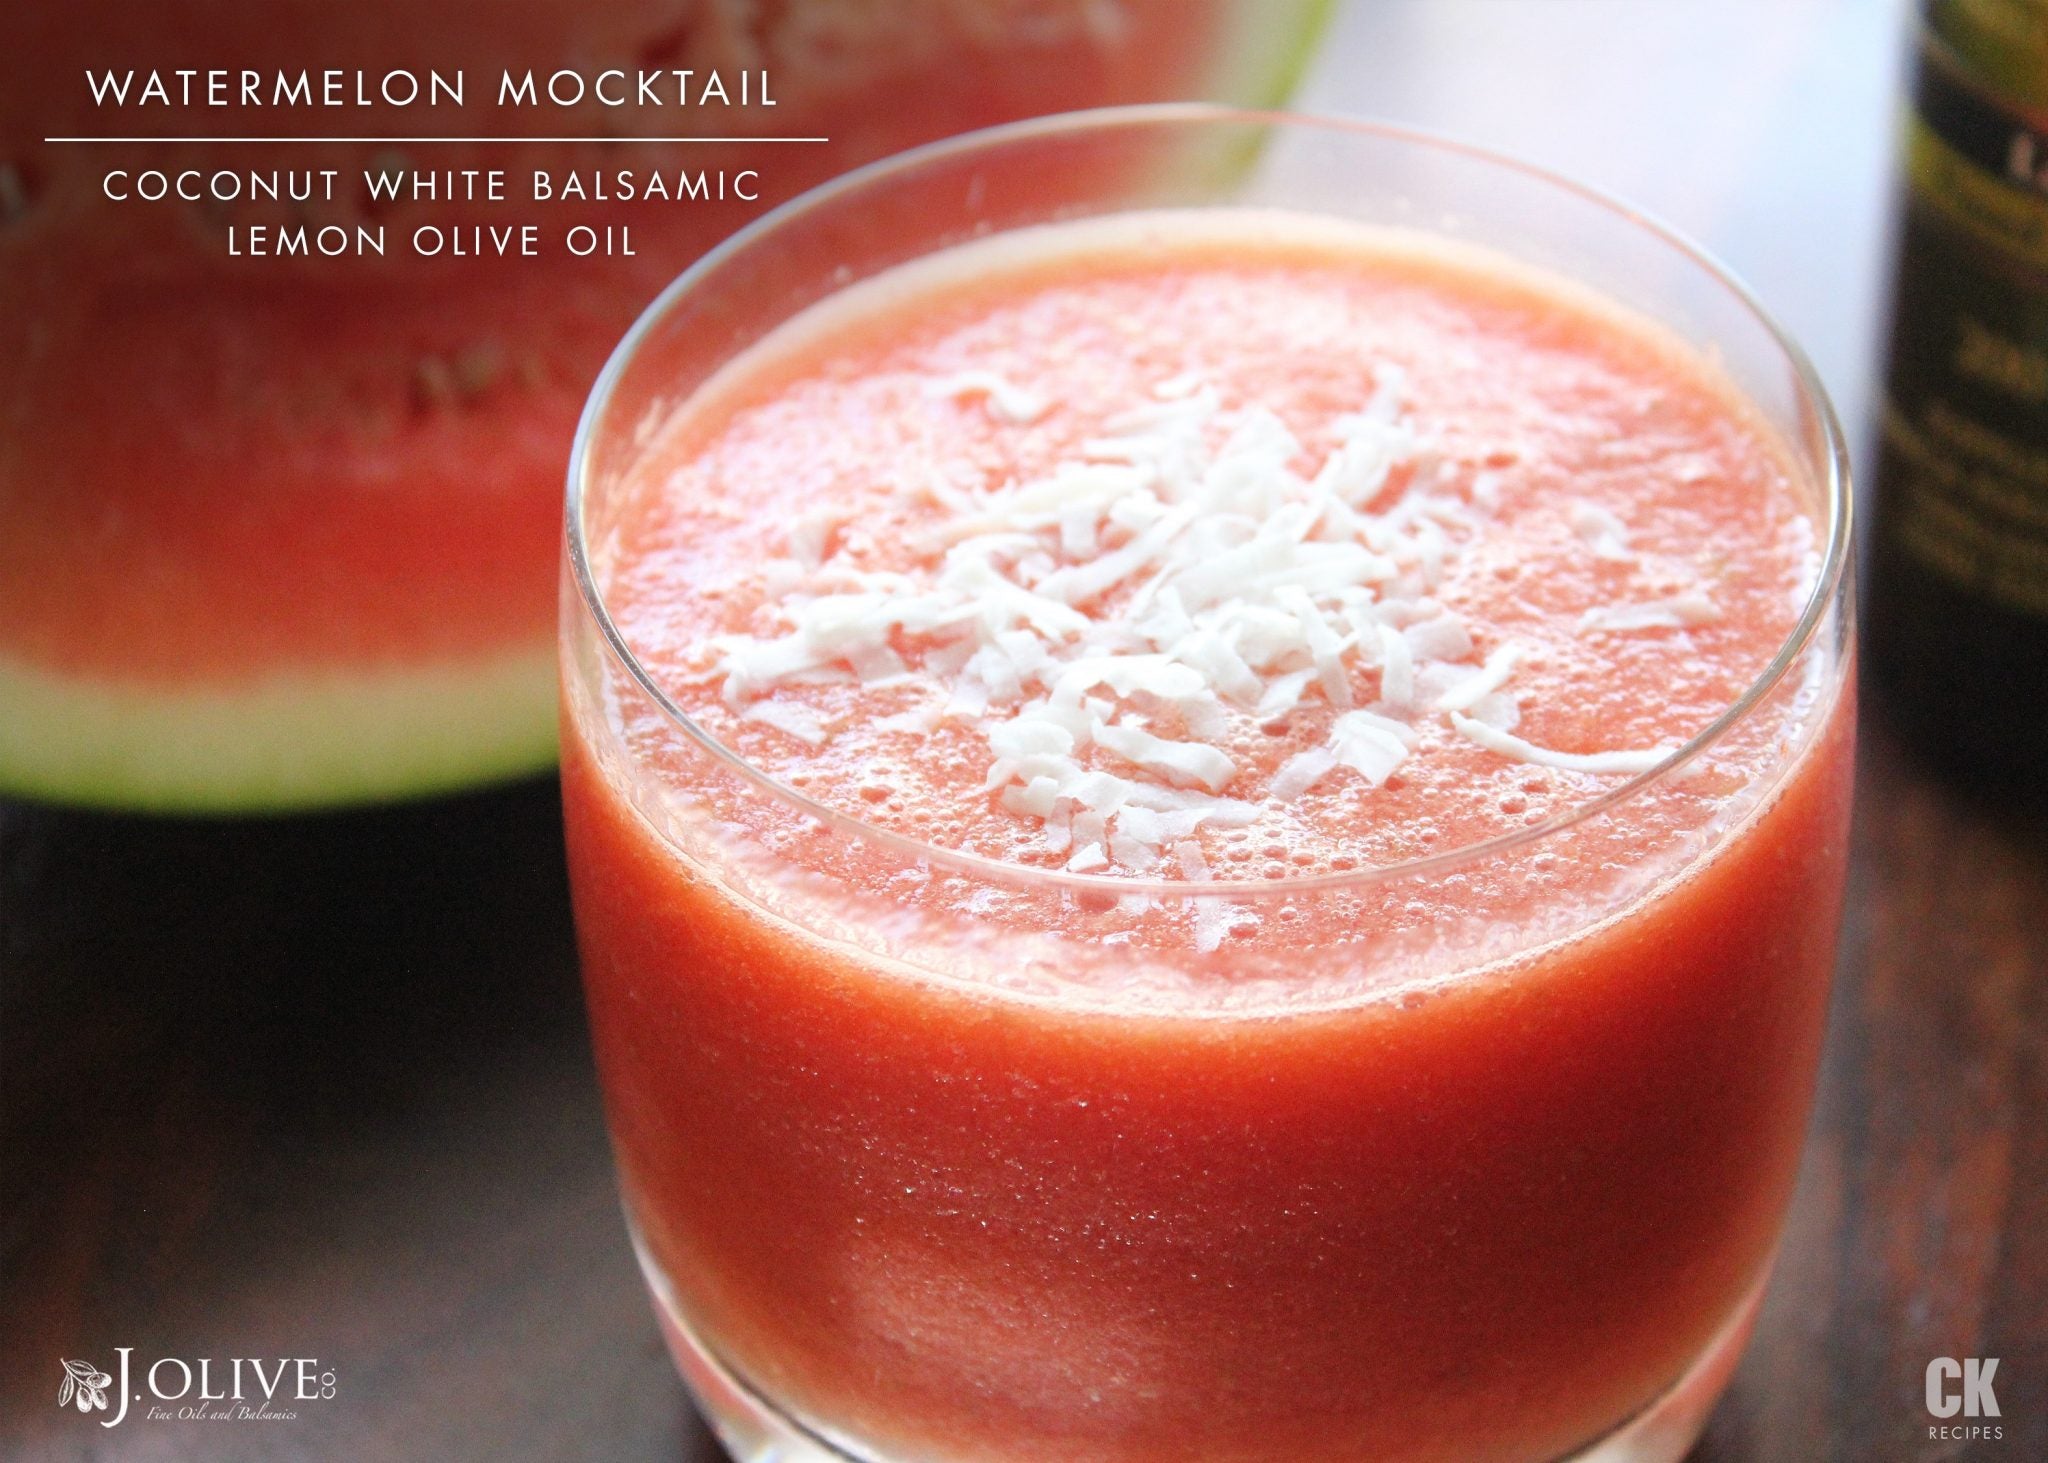 Watermelon Mocktail or Smoothie